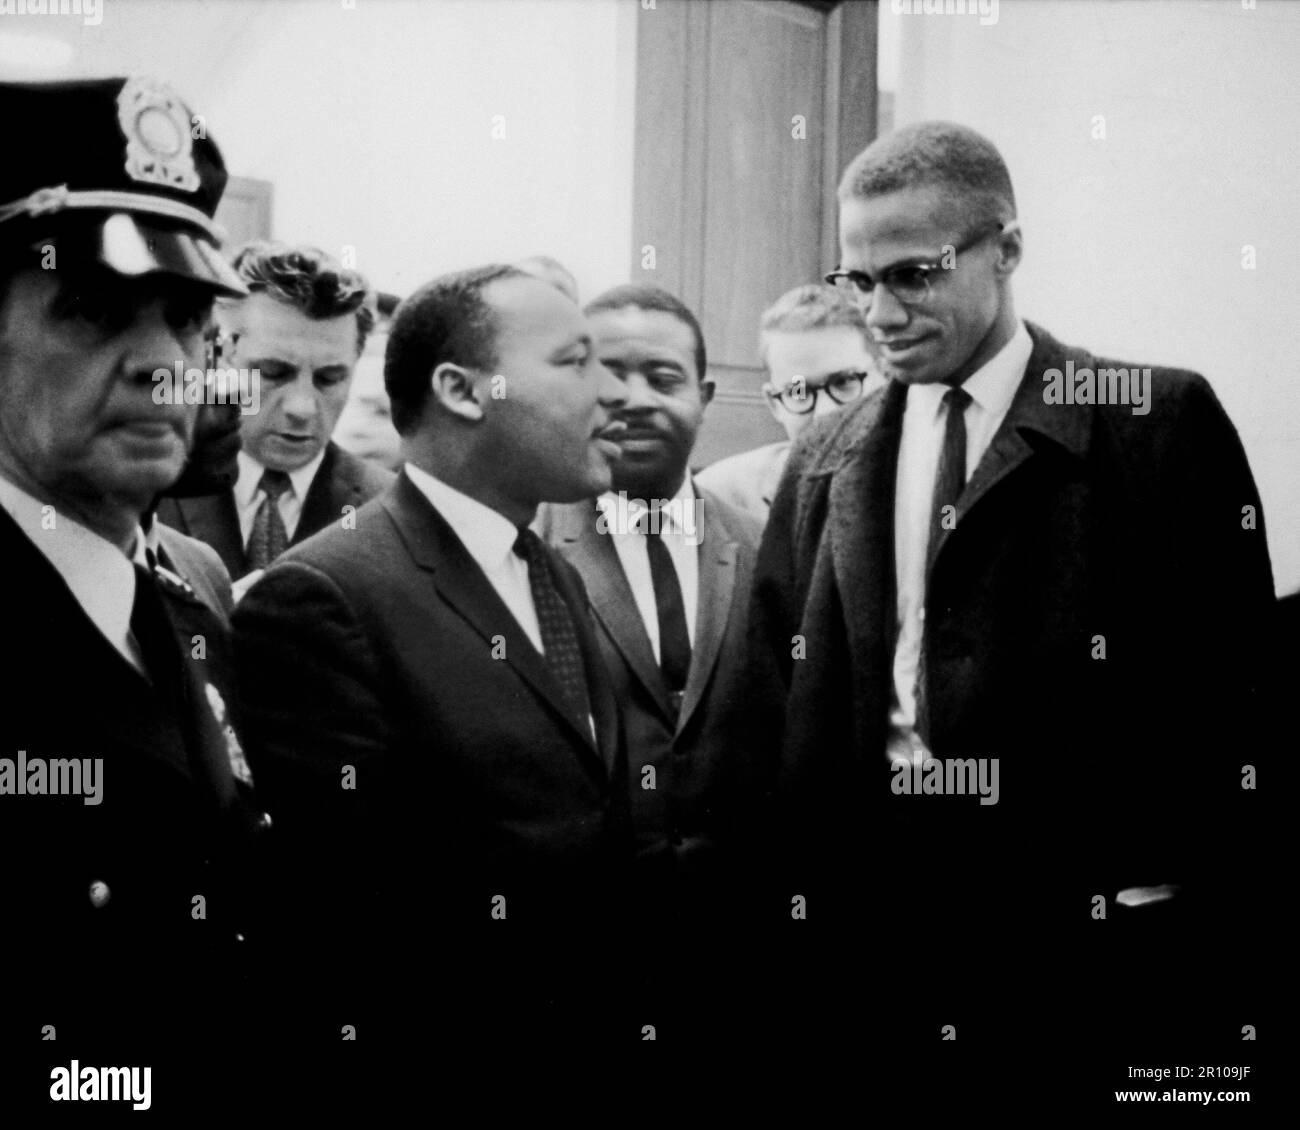 TITLE:  [Martin Luther King and Malcolm X waiting for press conference]..CALL NUMBER:  USN&WR COLL - Job no. 11695, frame 27  [P&P]..REPRODUCTION NUMBER:  LC-USZ6-1847 (b&w film copy neg.).No known retrictions on publication...MEDIUM:  1 photographic print...CREATED/PUBLISHED:  [1964 March 26]..CREATOR:..Trikosko, Marion S., photographer...NOTES:..U.S. News & World Report Magazine Photograph Collection...SUBJECTS:..King, Martin Luther, Jr., 1929-1968--Public appearances..X, Malcolm, 1925-1965--Public appearances...FORMAT:..Photographic prints 1960-1970...REPOSITORY:  Library of Congress Prints Stock Photo